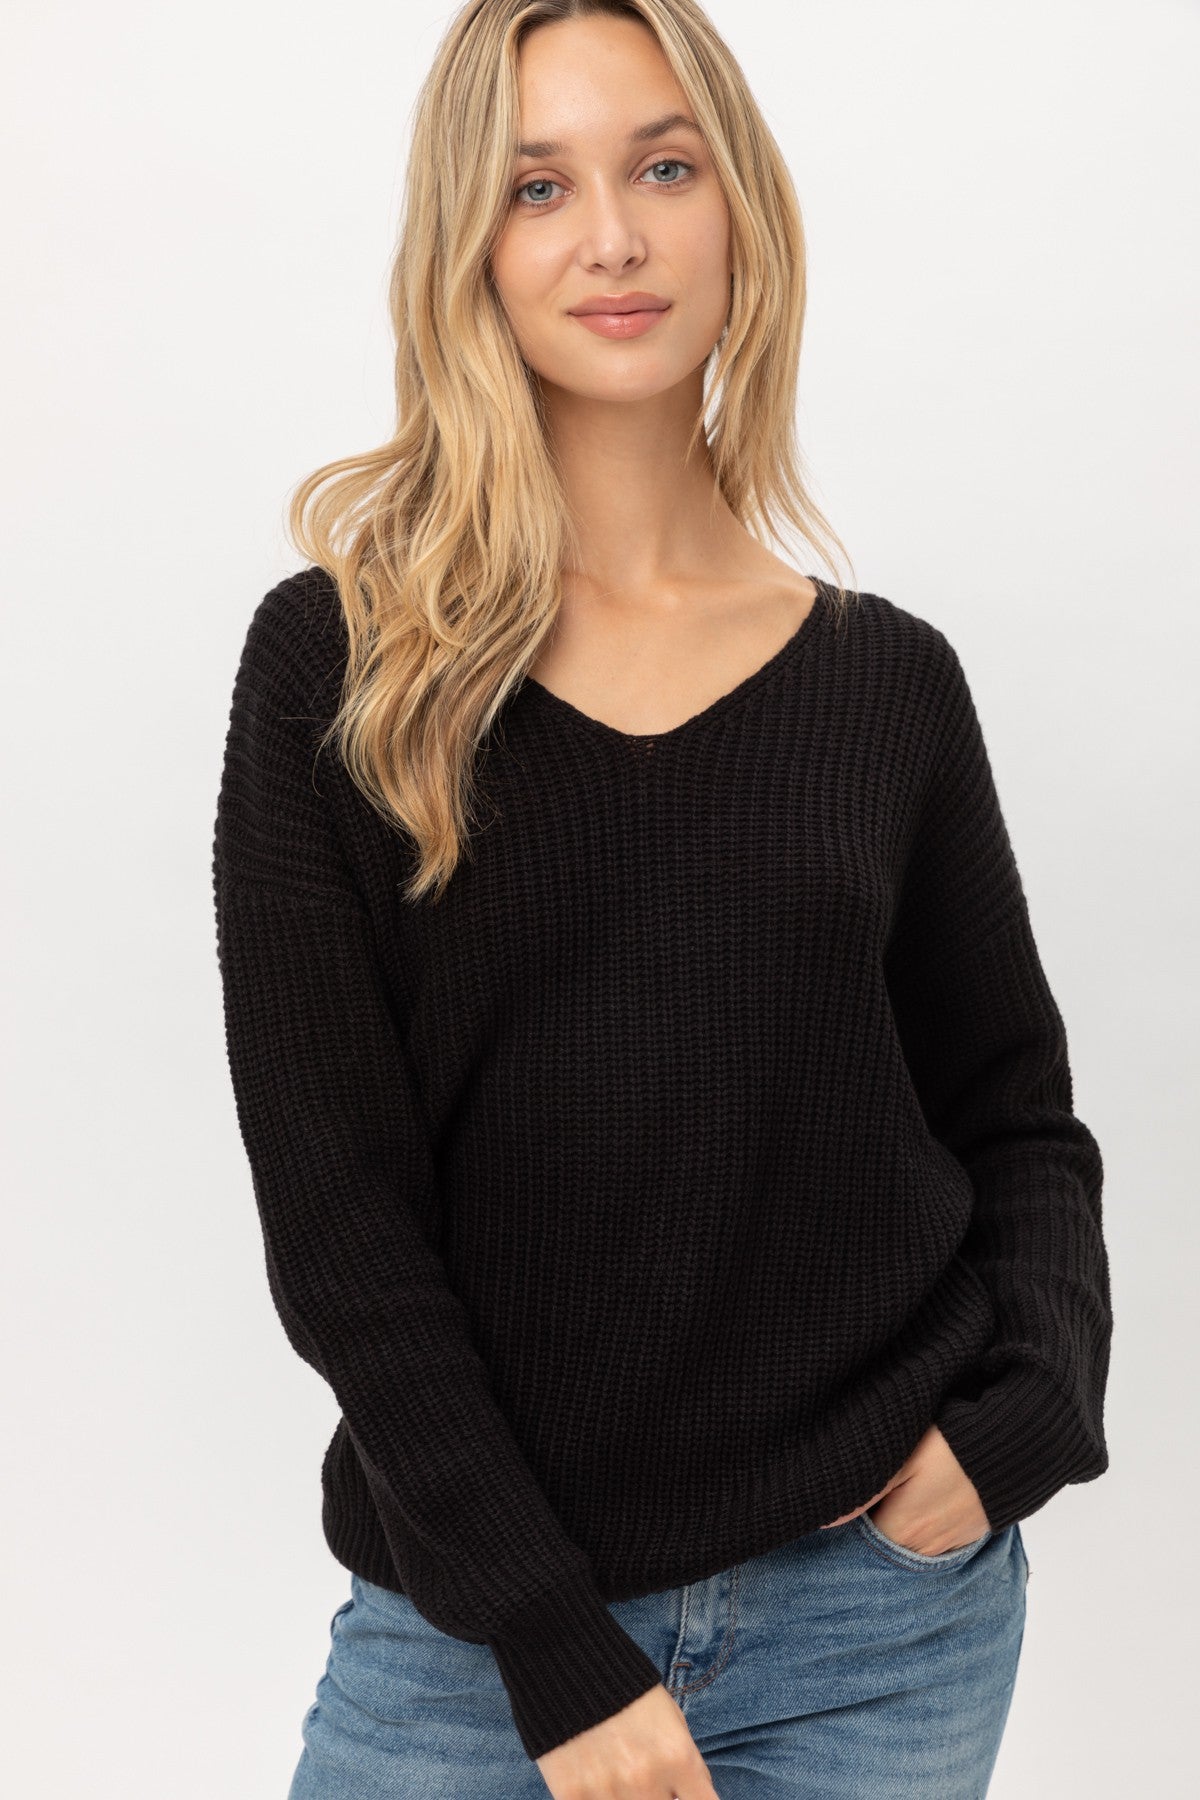 NEW Oversized Twisted Back Sweater - 2 Colors